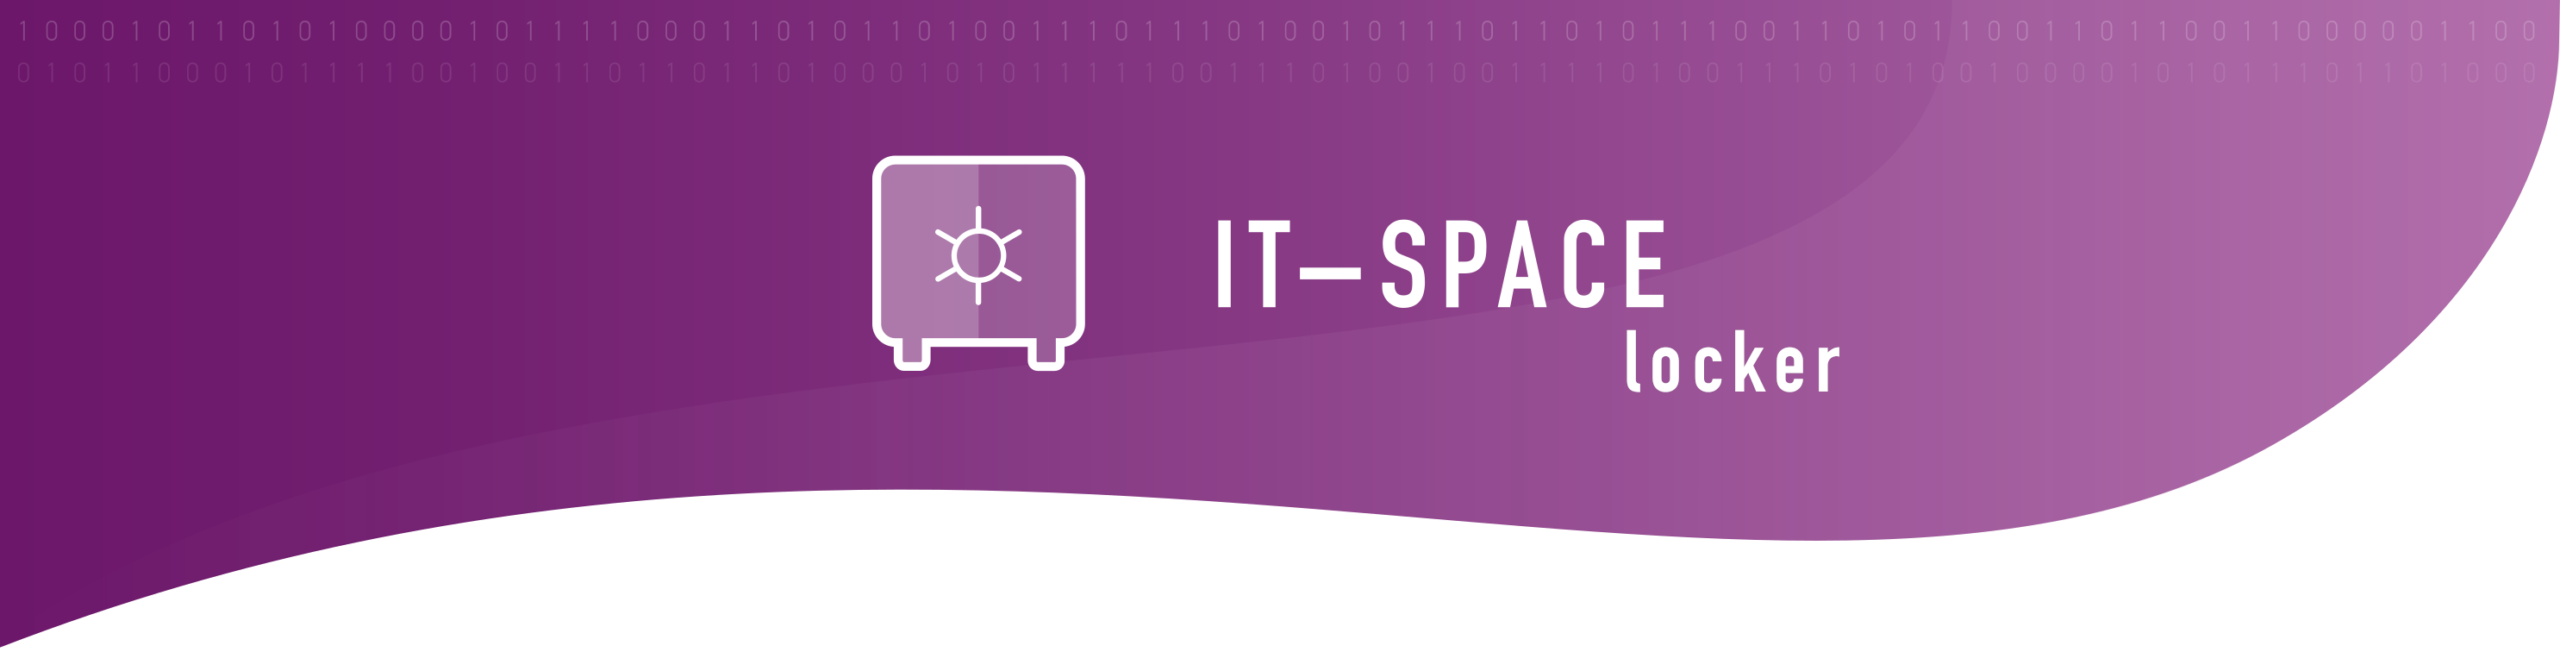 IT-SPACE loose_Product banner